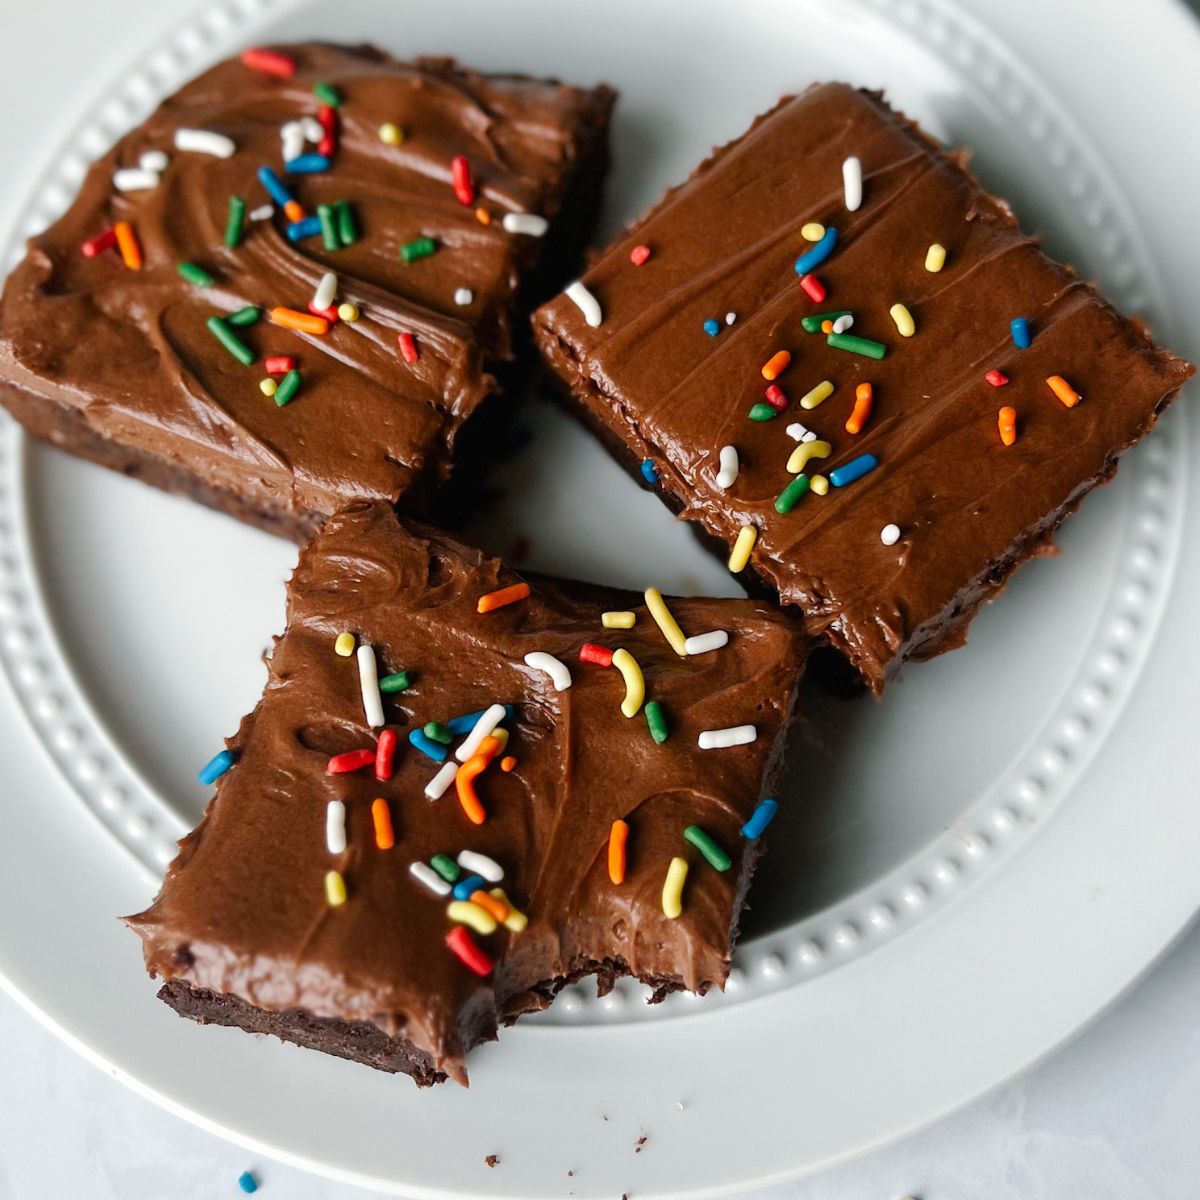 Plate of three brownies with chocolate frosting and sprinkles on top. One brownie has a bite taken out of it.